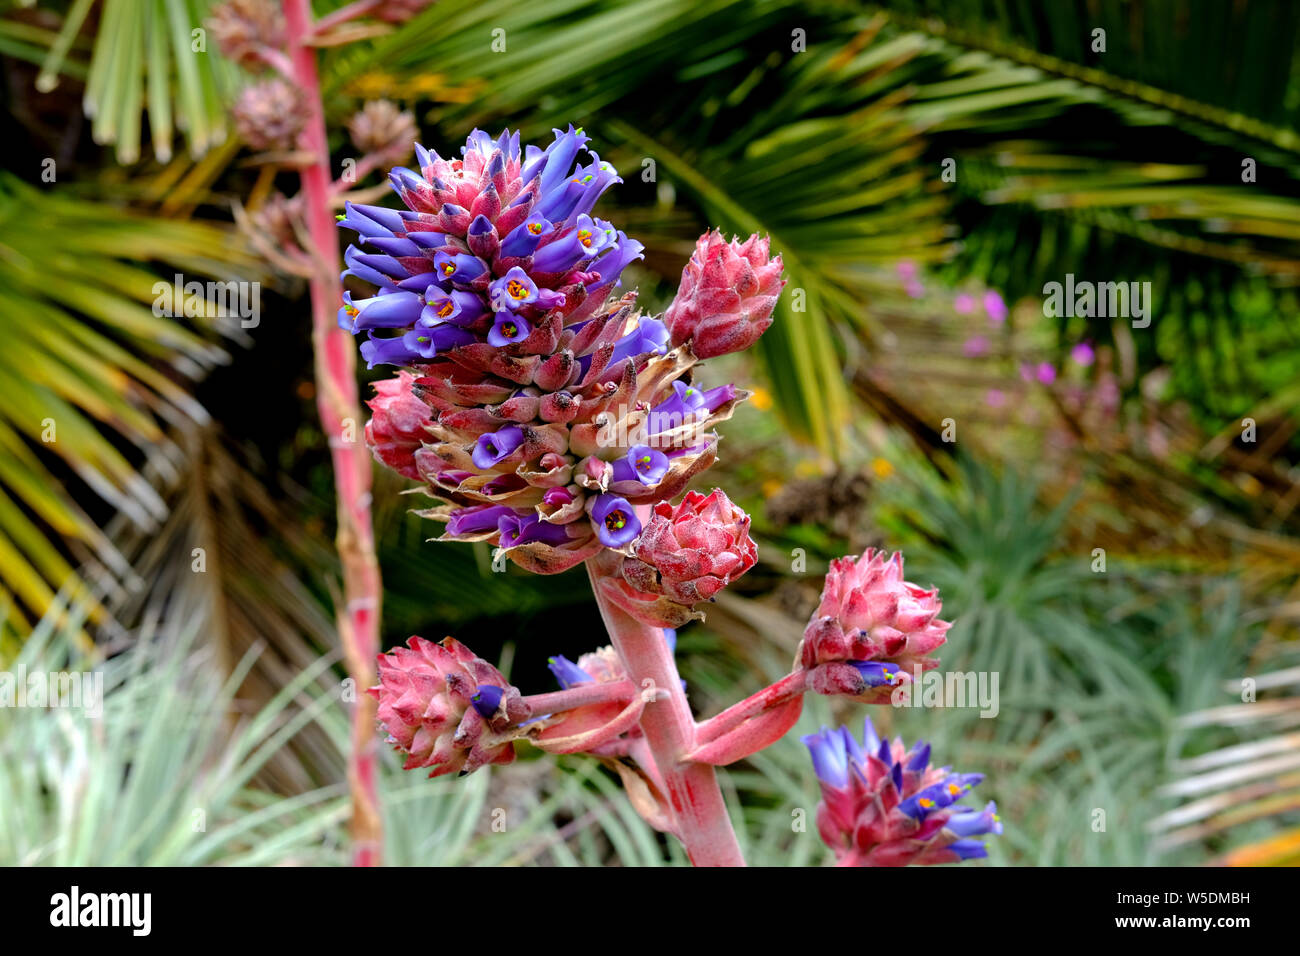 Puya venusta (Chagualillo), a rare plant native of Chile and part of the Bromeliaceae family, at the San Francisco Botanical Garden in California. Stock Photo